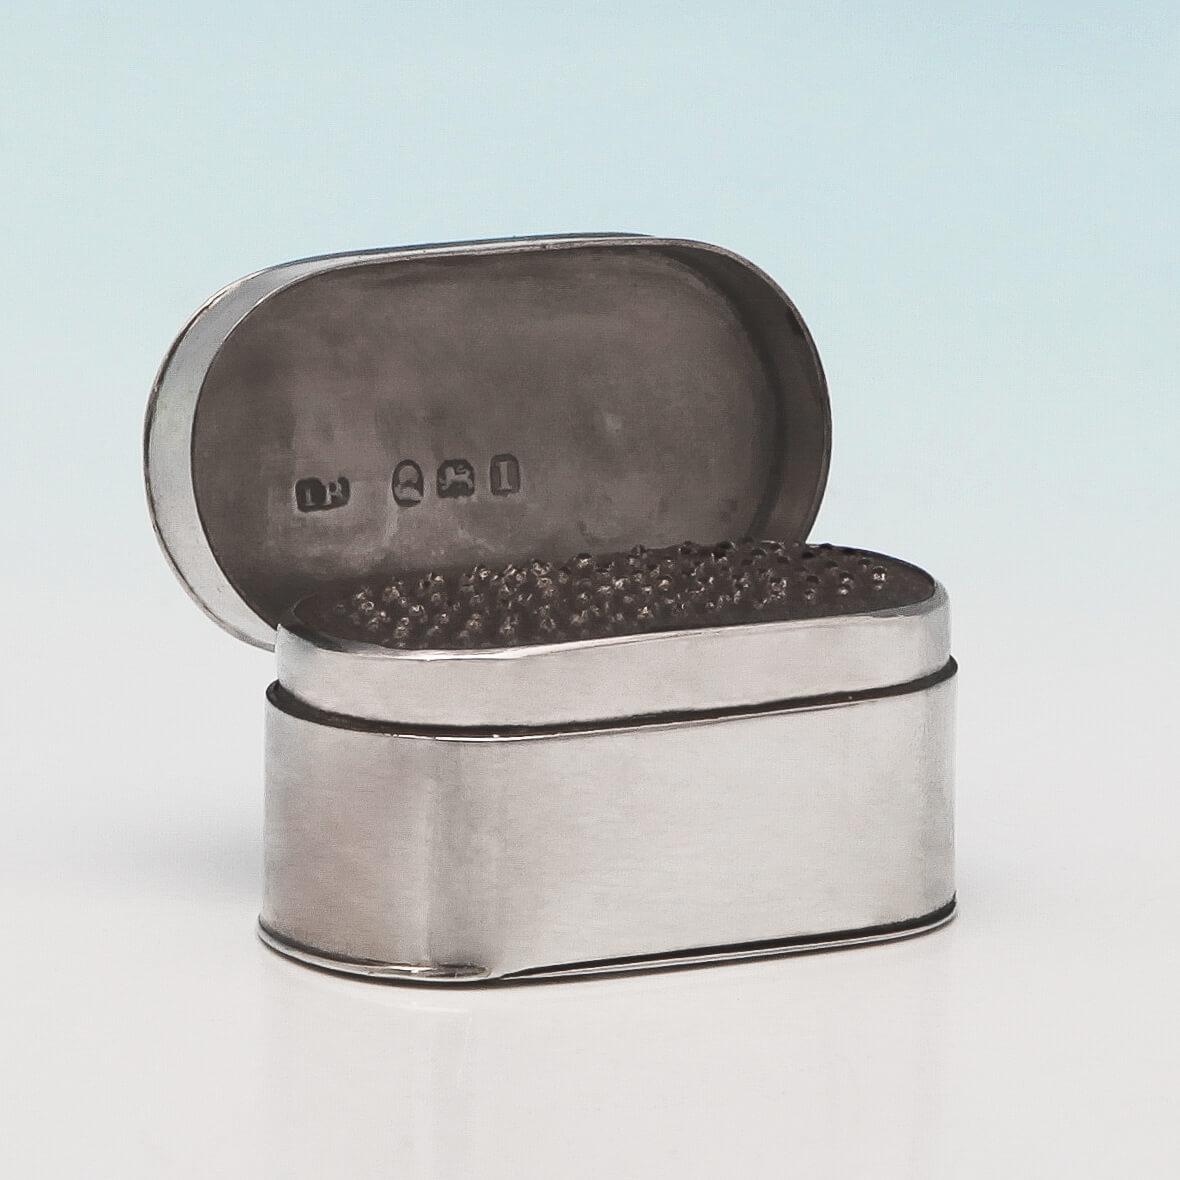 Hallmarked in London in 1804 by John Reily, this handsome, George III, Antique Sterling Silver Nutmeg Grater, is simple in form with curved sides, an original engraved crest and initial 'W' on the lid. The nutmeg grater measures 1